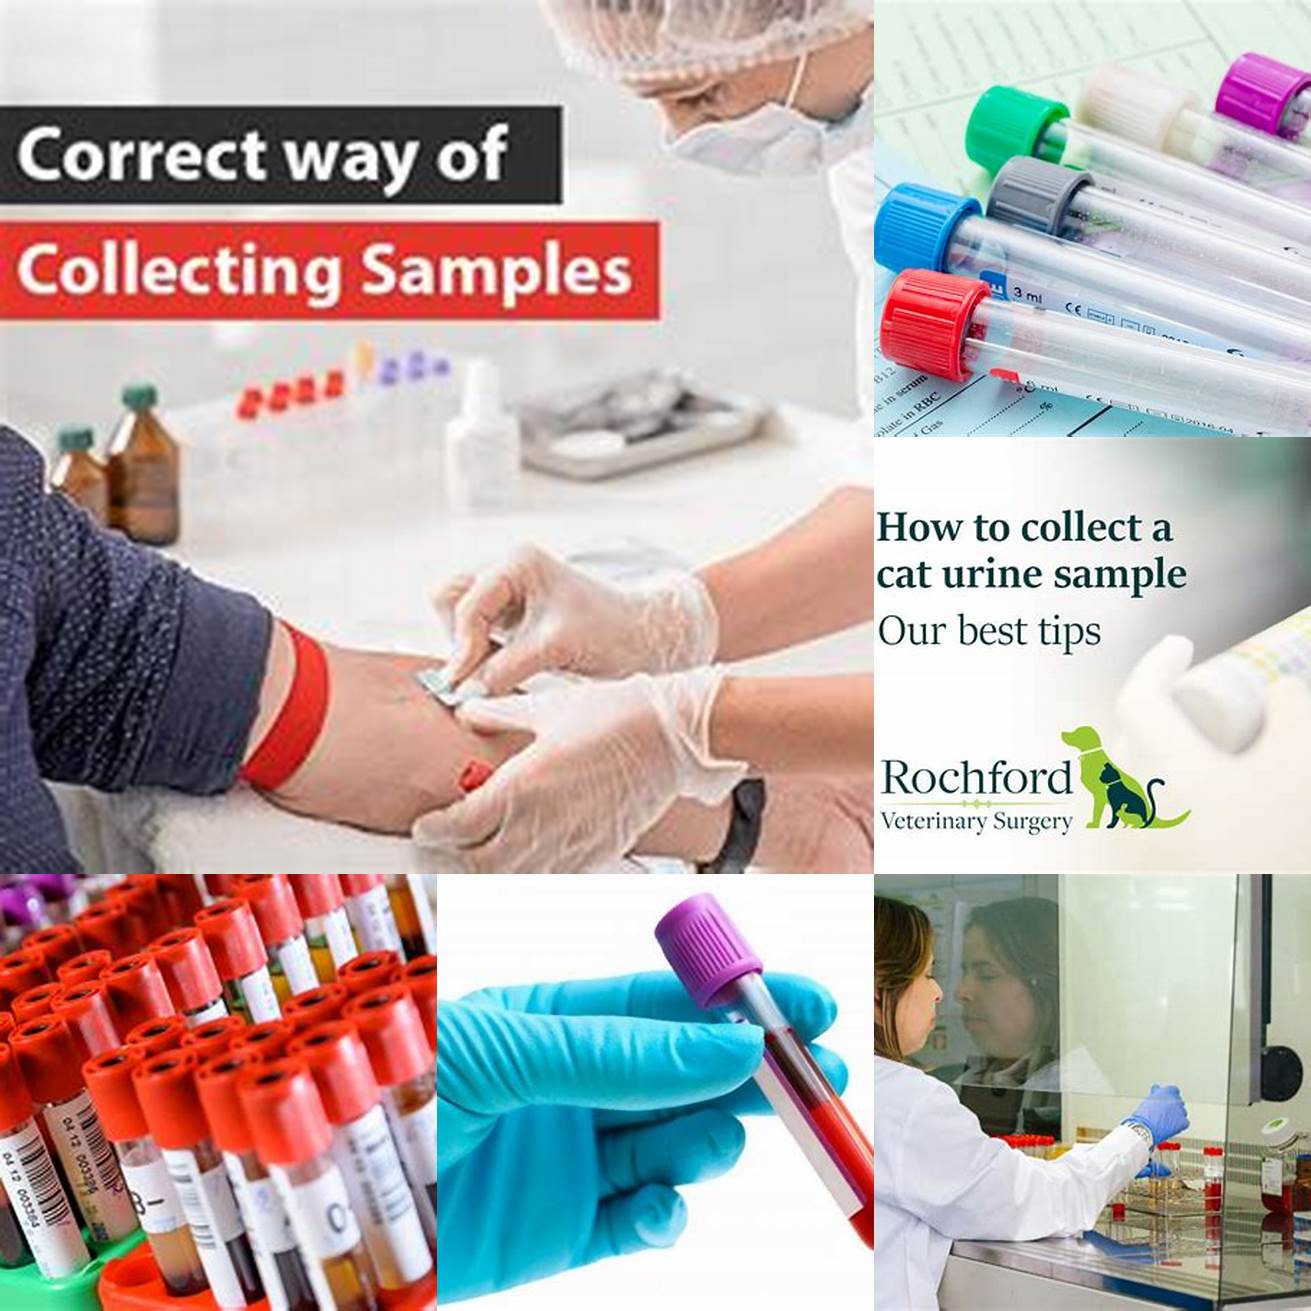 Collect a good sample Collect a good sample to ensure an accurate result